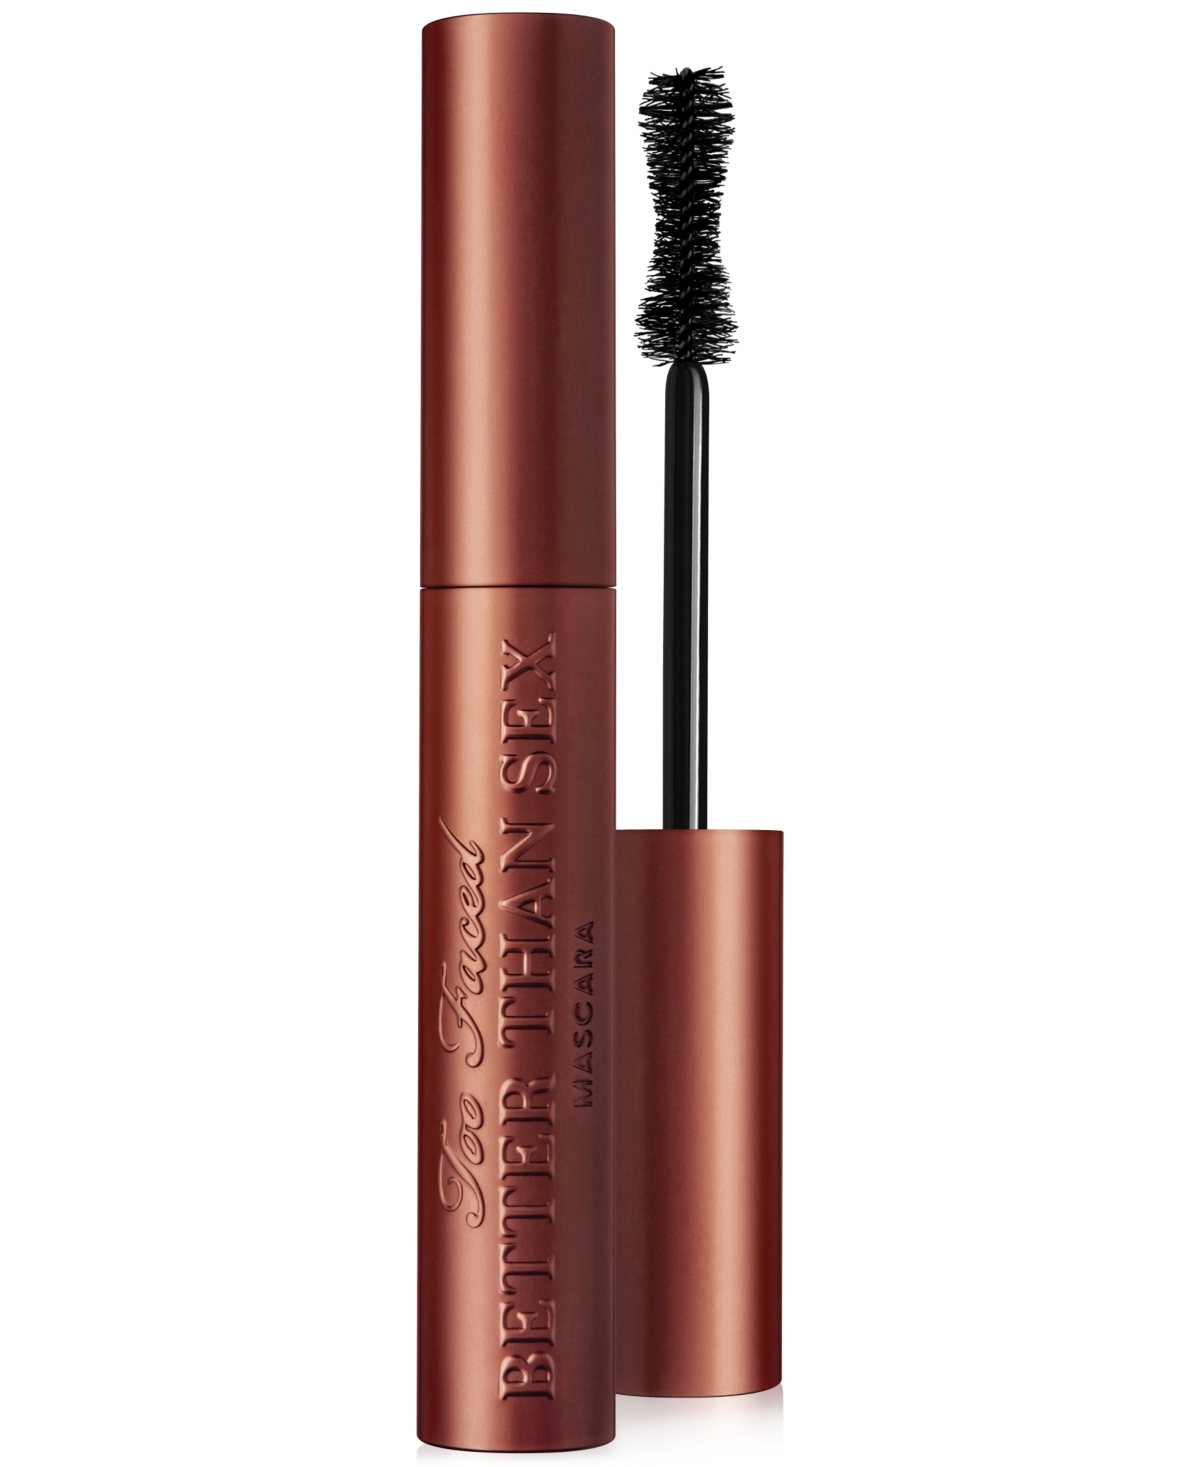 Too Faced Better Than Sex Volumizing Mascara - Chocolate Brown In Chocolate - Brown